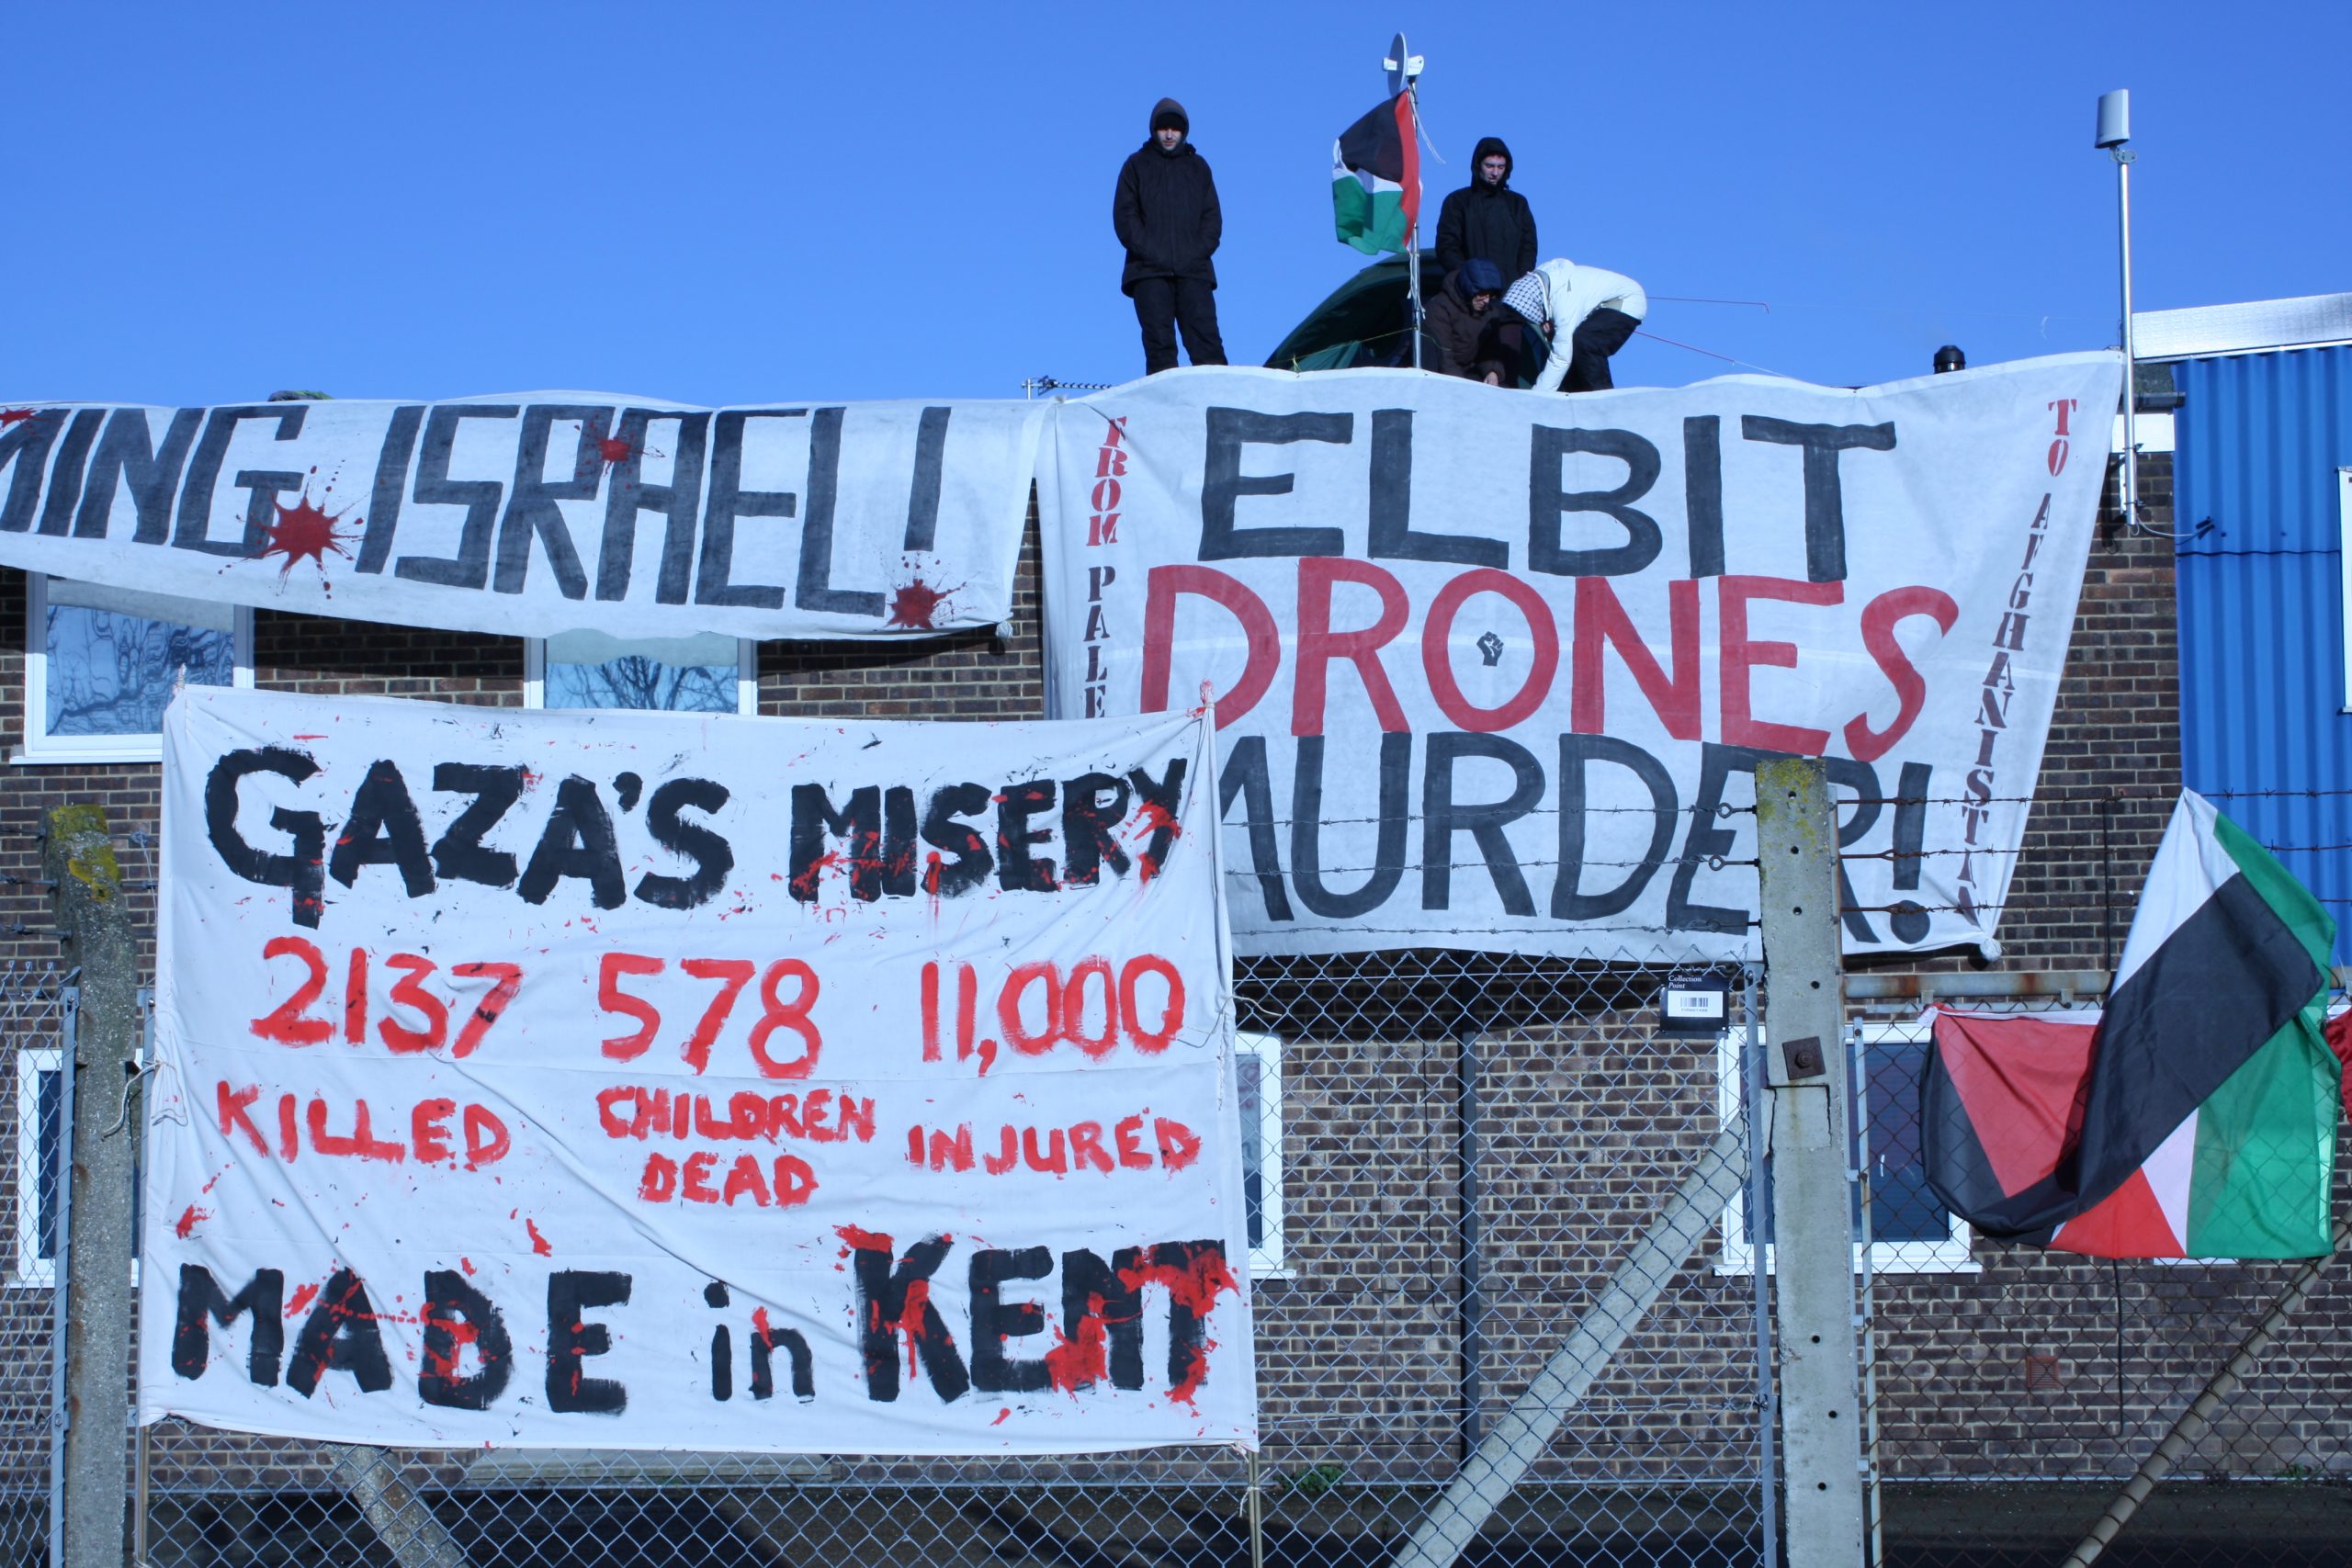 Activists stand on a factory roof behind barbed wire. Banners read 'Stop arming Israel!', 'Elbit drones murder!', and 'Gaza's misery; 2137 killed, 578 children dead, 11,000 injured; Made in Kent'